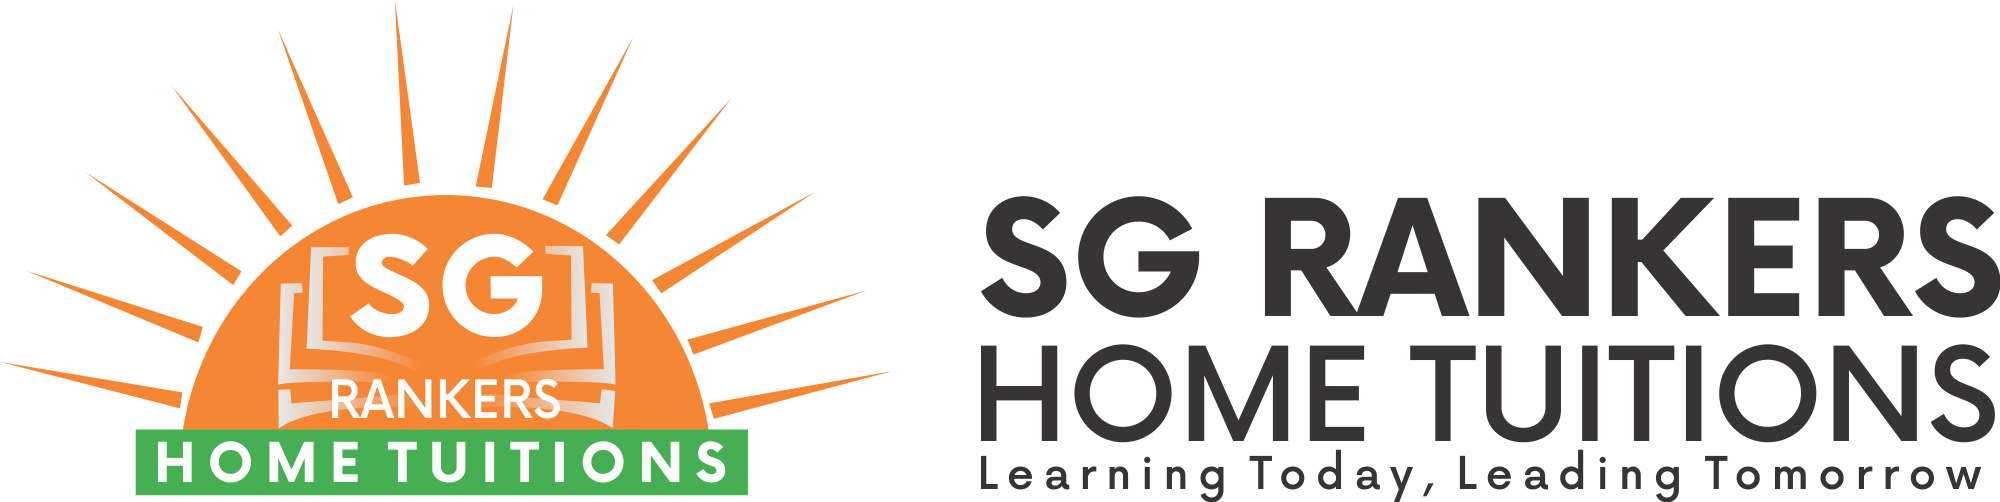 SG Ranker Home Tuitions